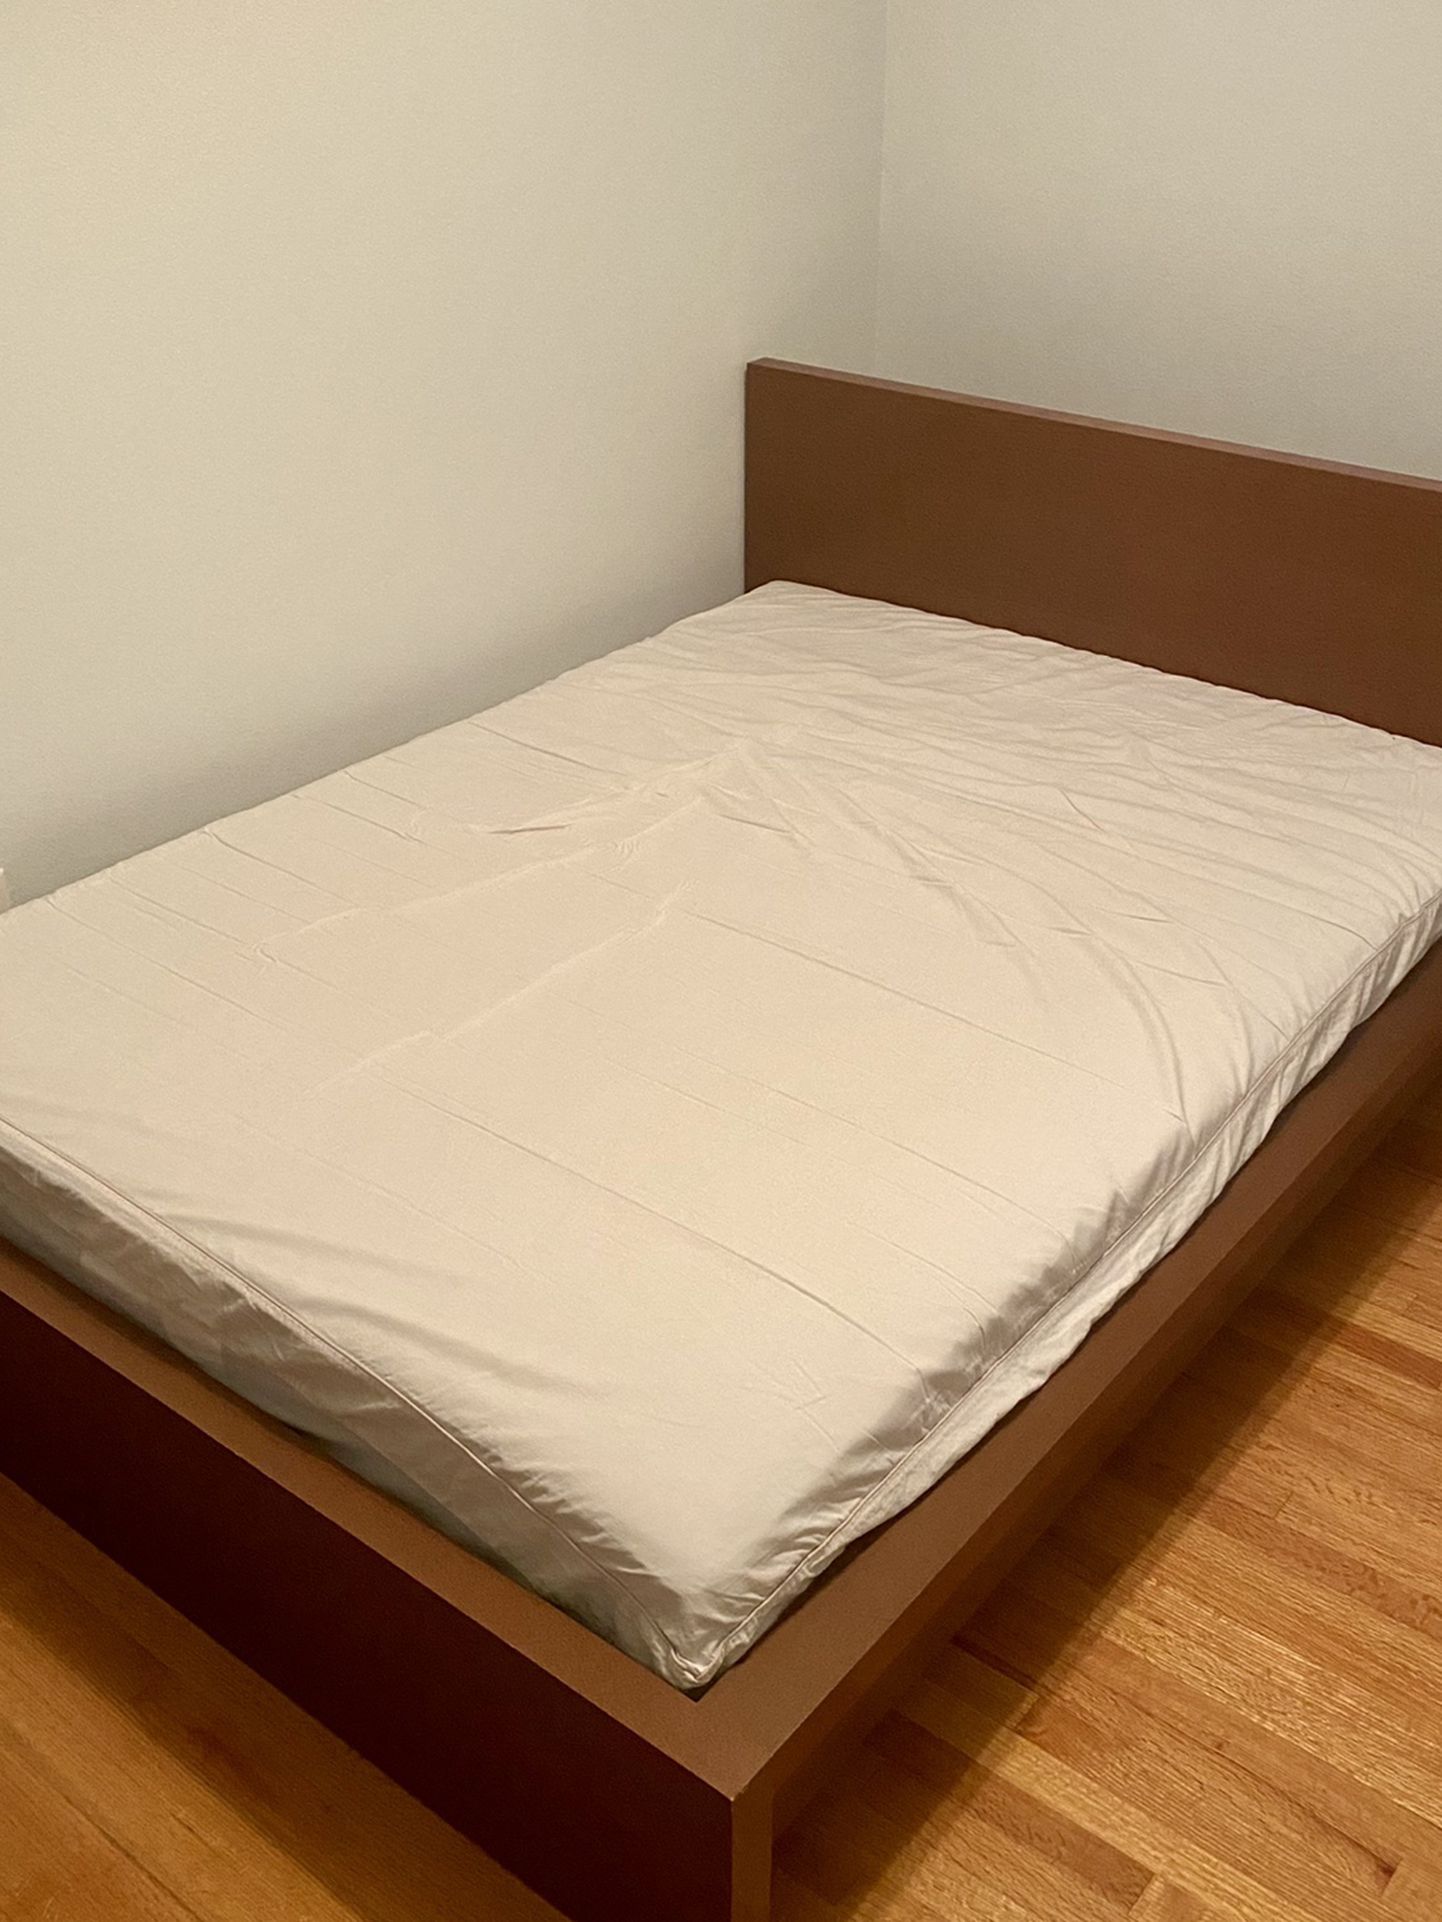 IKEA MALM Brown Full Size Bed Frame Including Wooden Slats And A Full Size Mattress